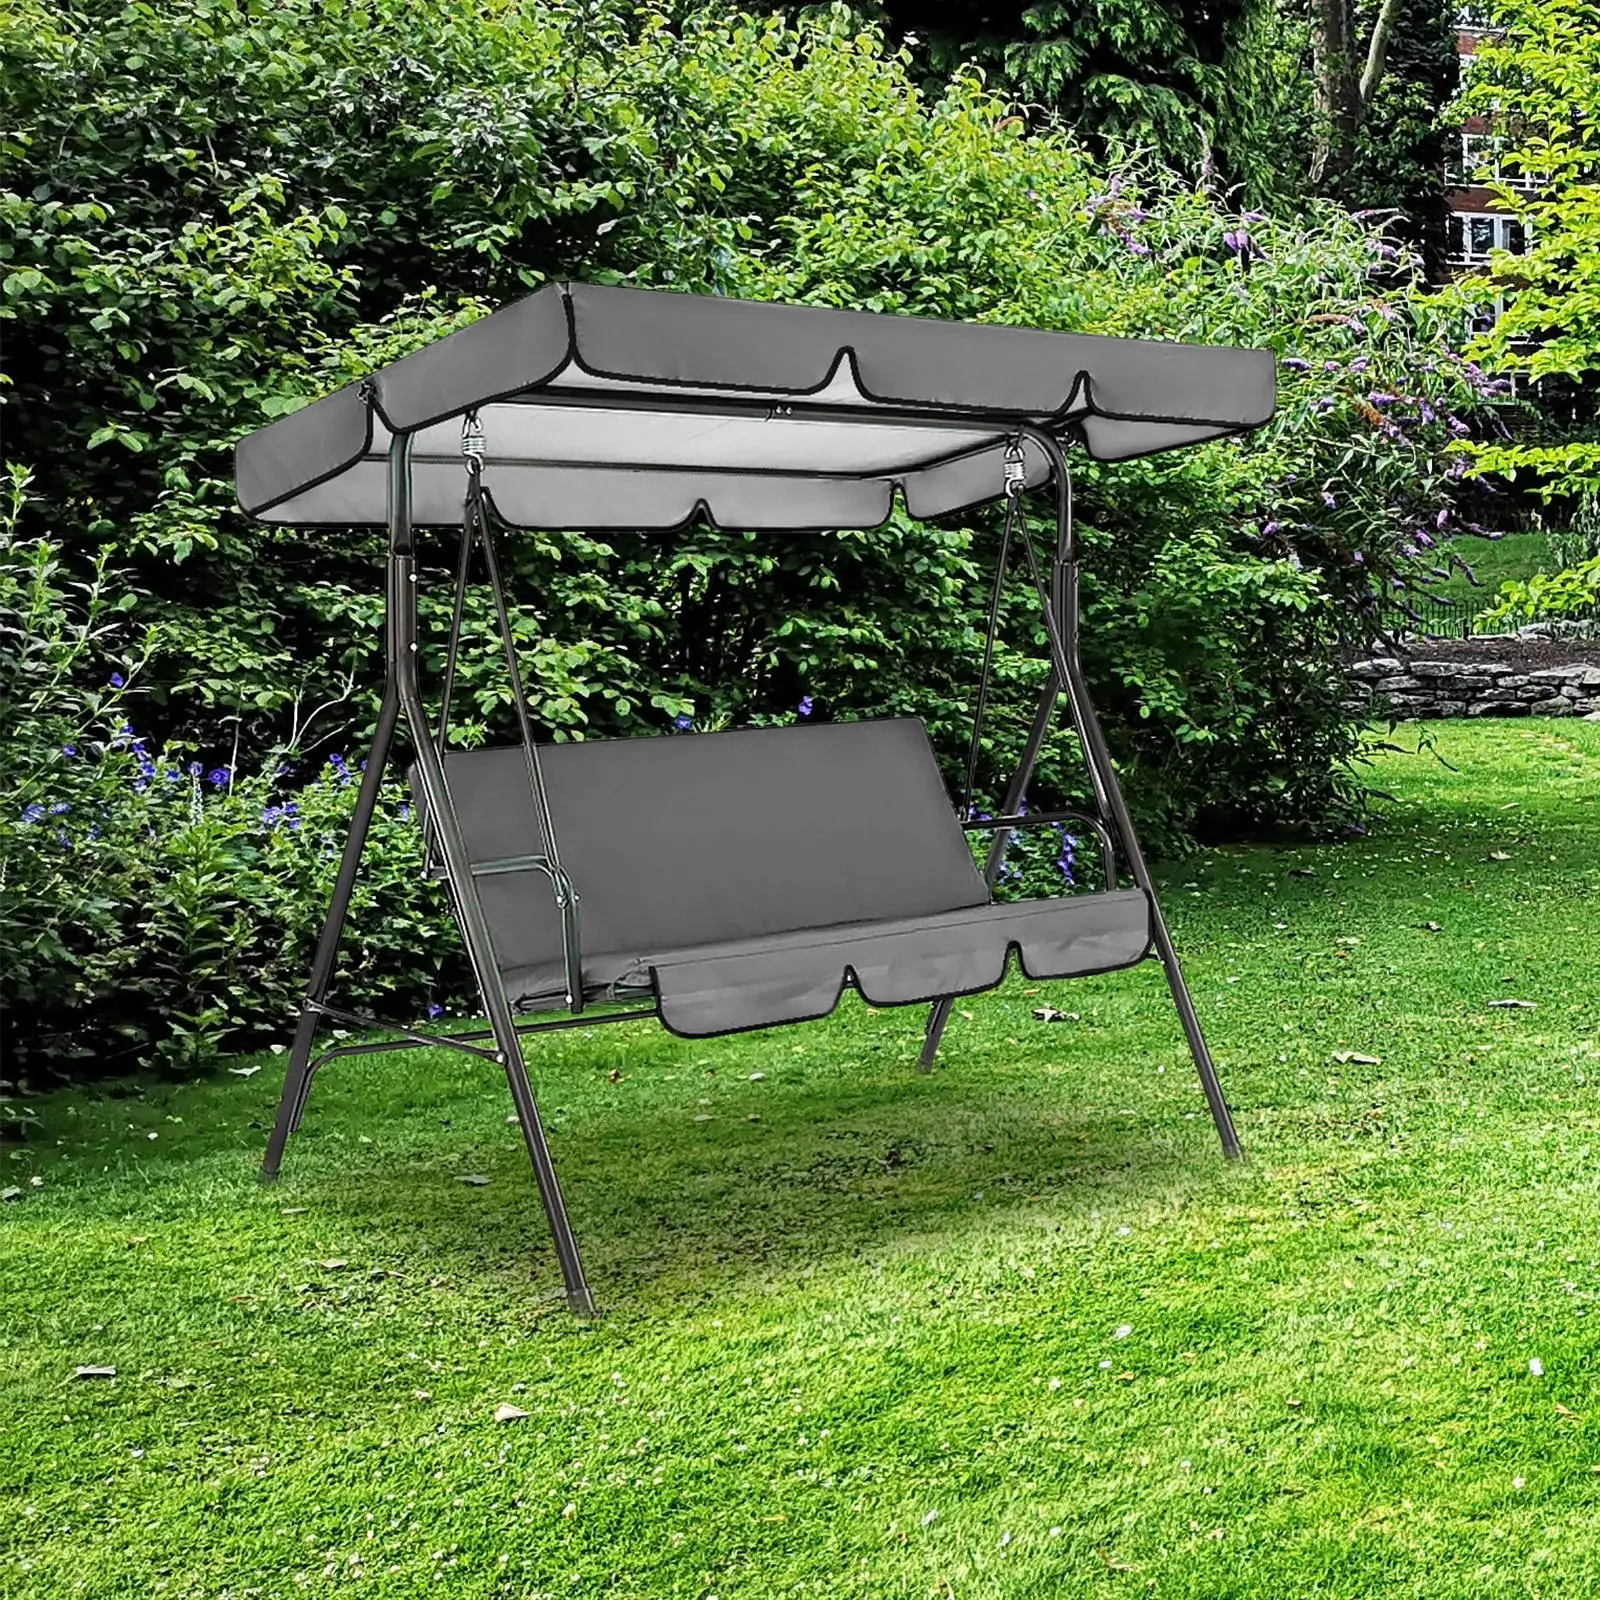 Patio Swing Canopy Swing Chair Dust Covers Dustproof Durable Garden Swing Chair Cover for Porch Seat Garden Outdoor